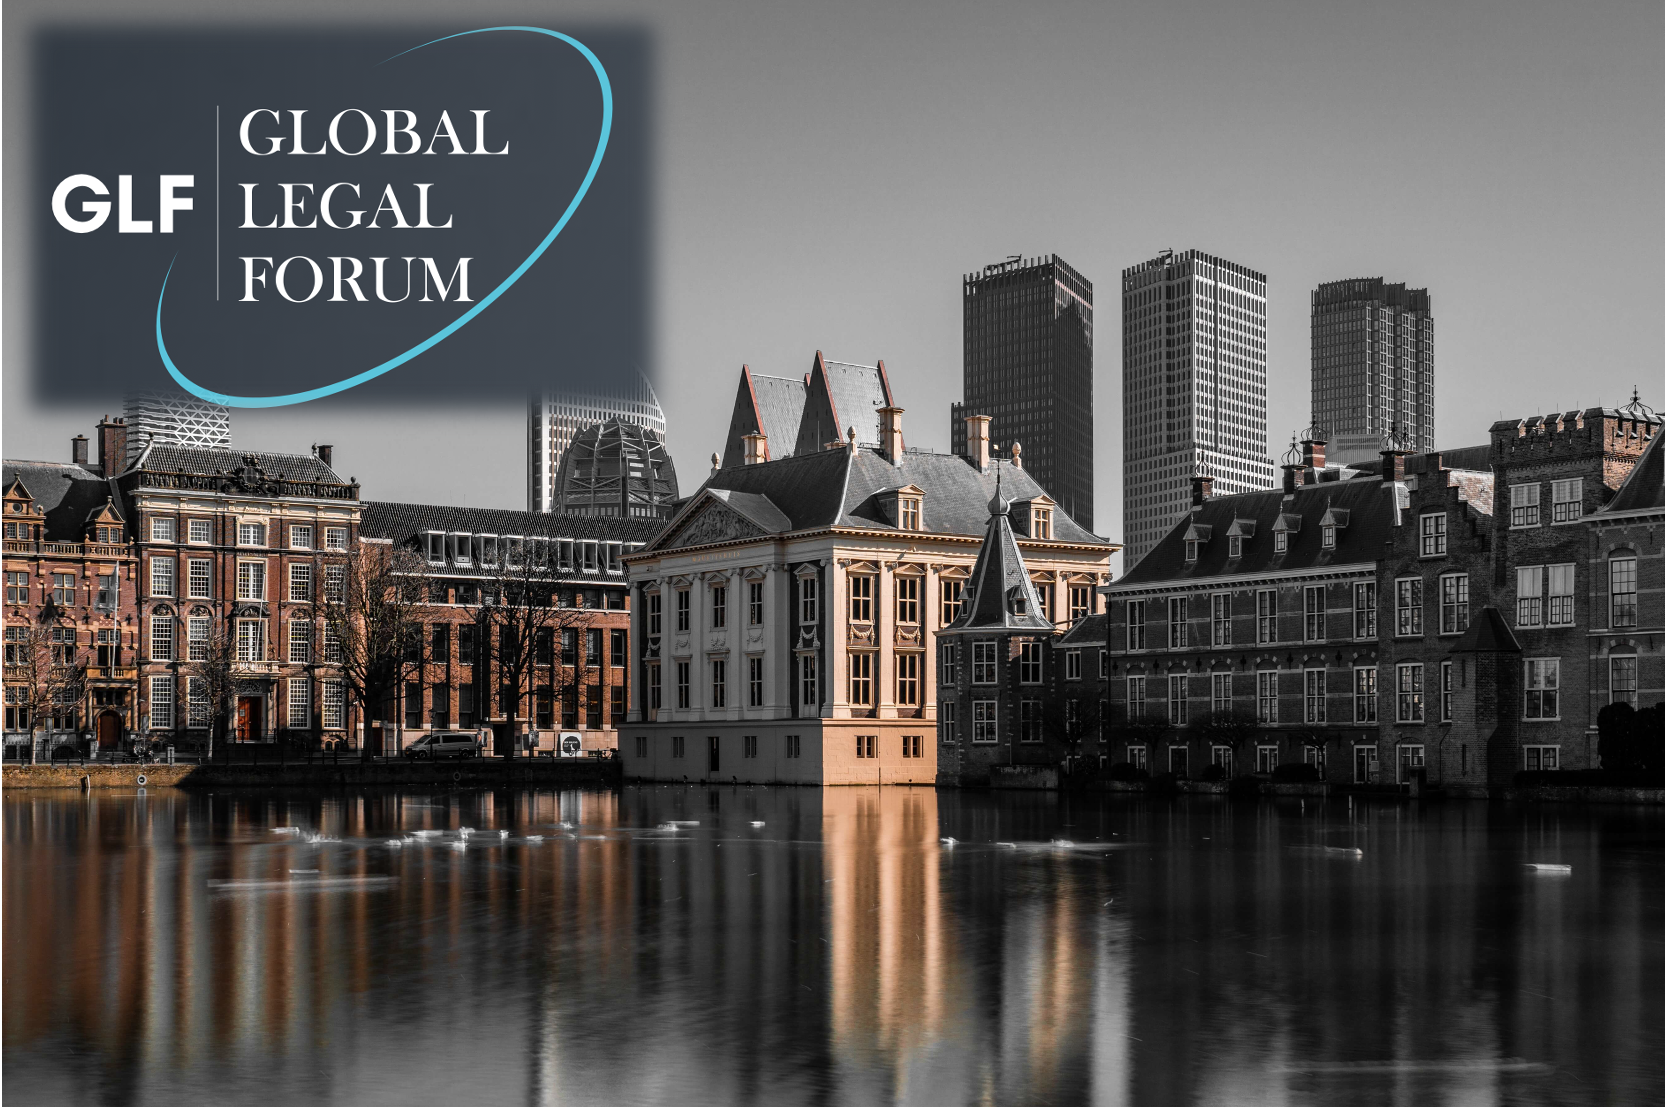 Global Legal Forum 2022 – December 1st and 2nd in The Hague